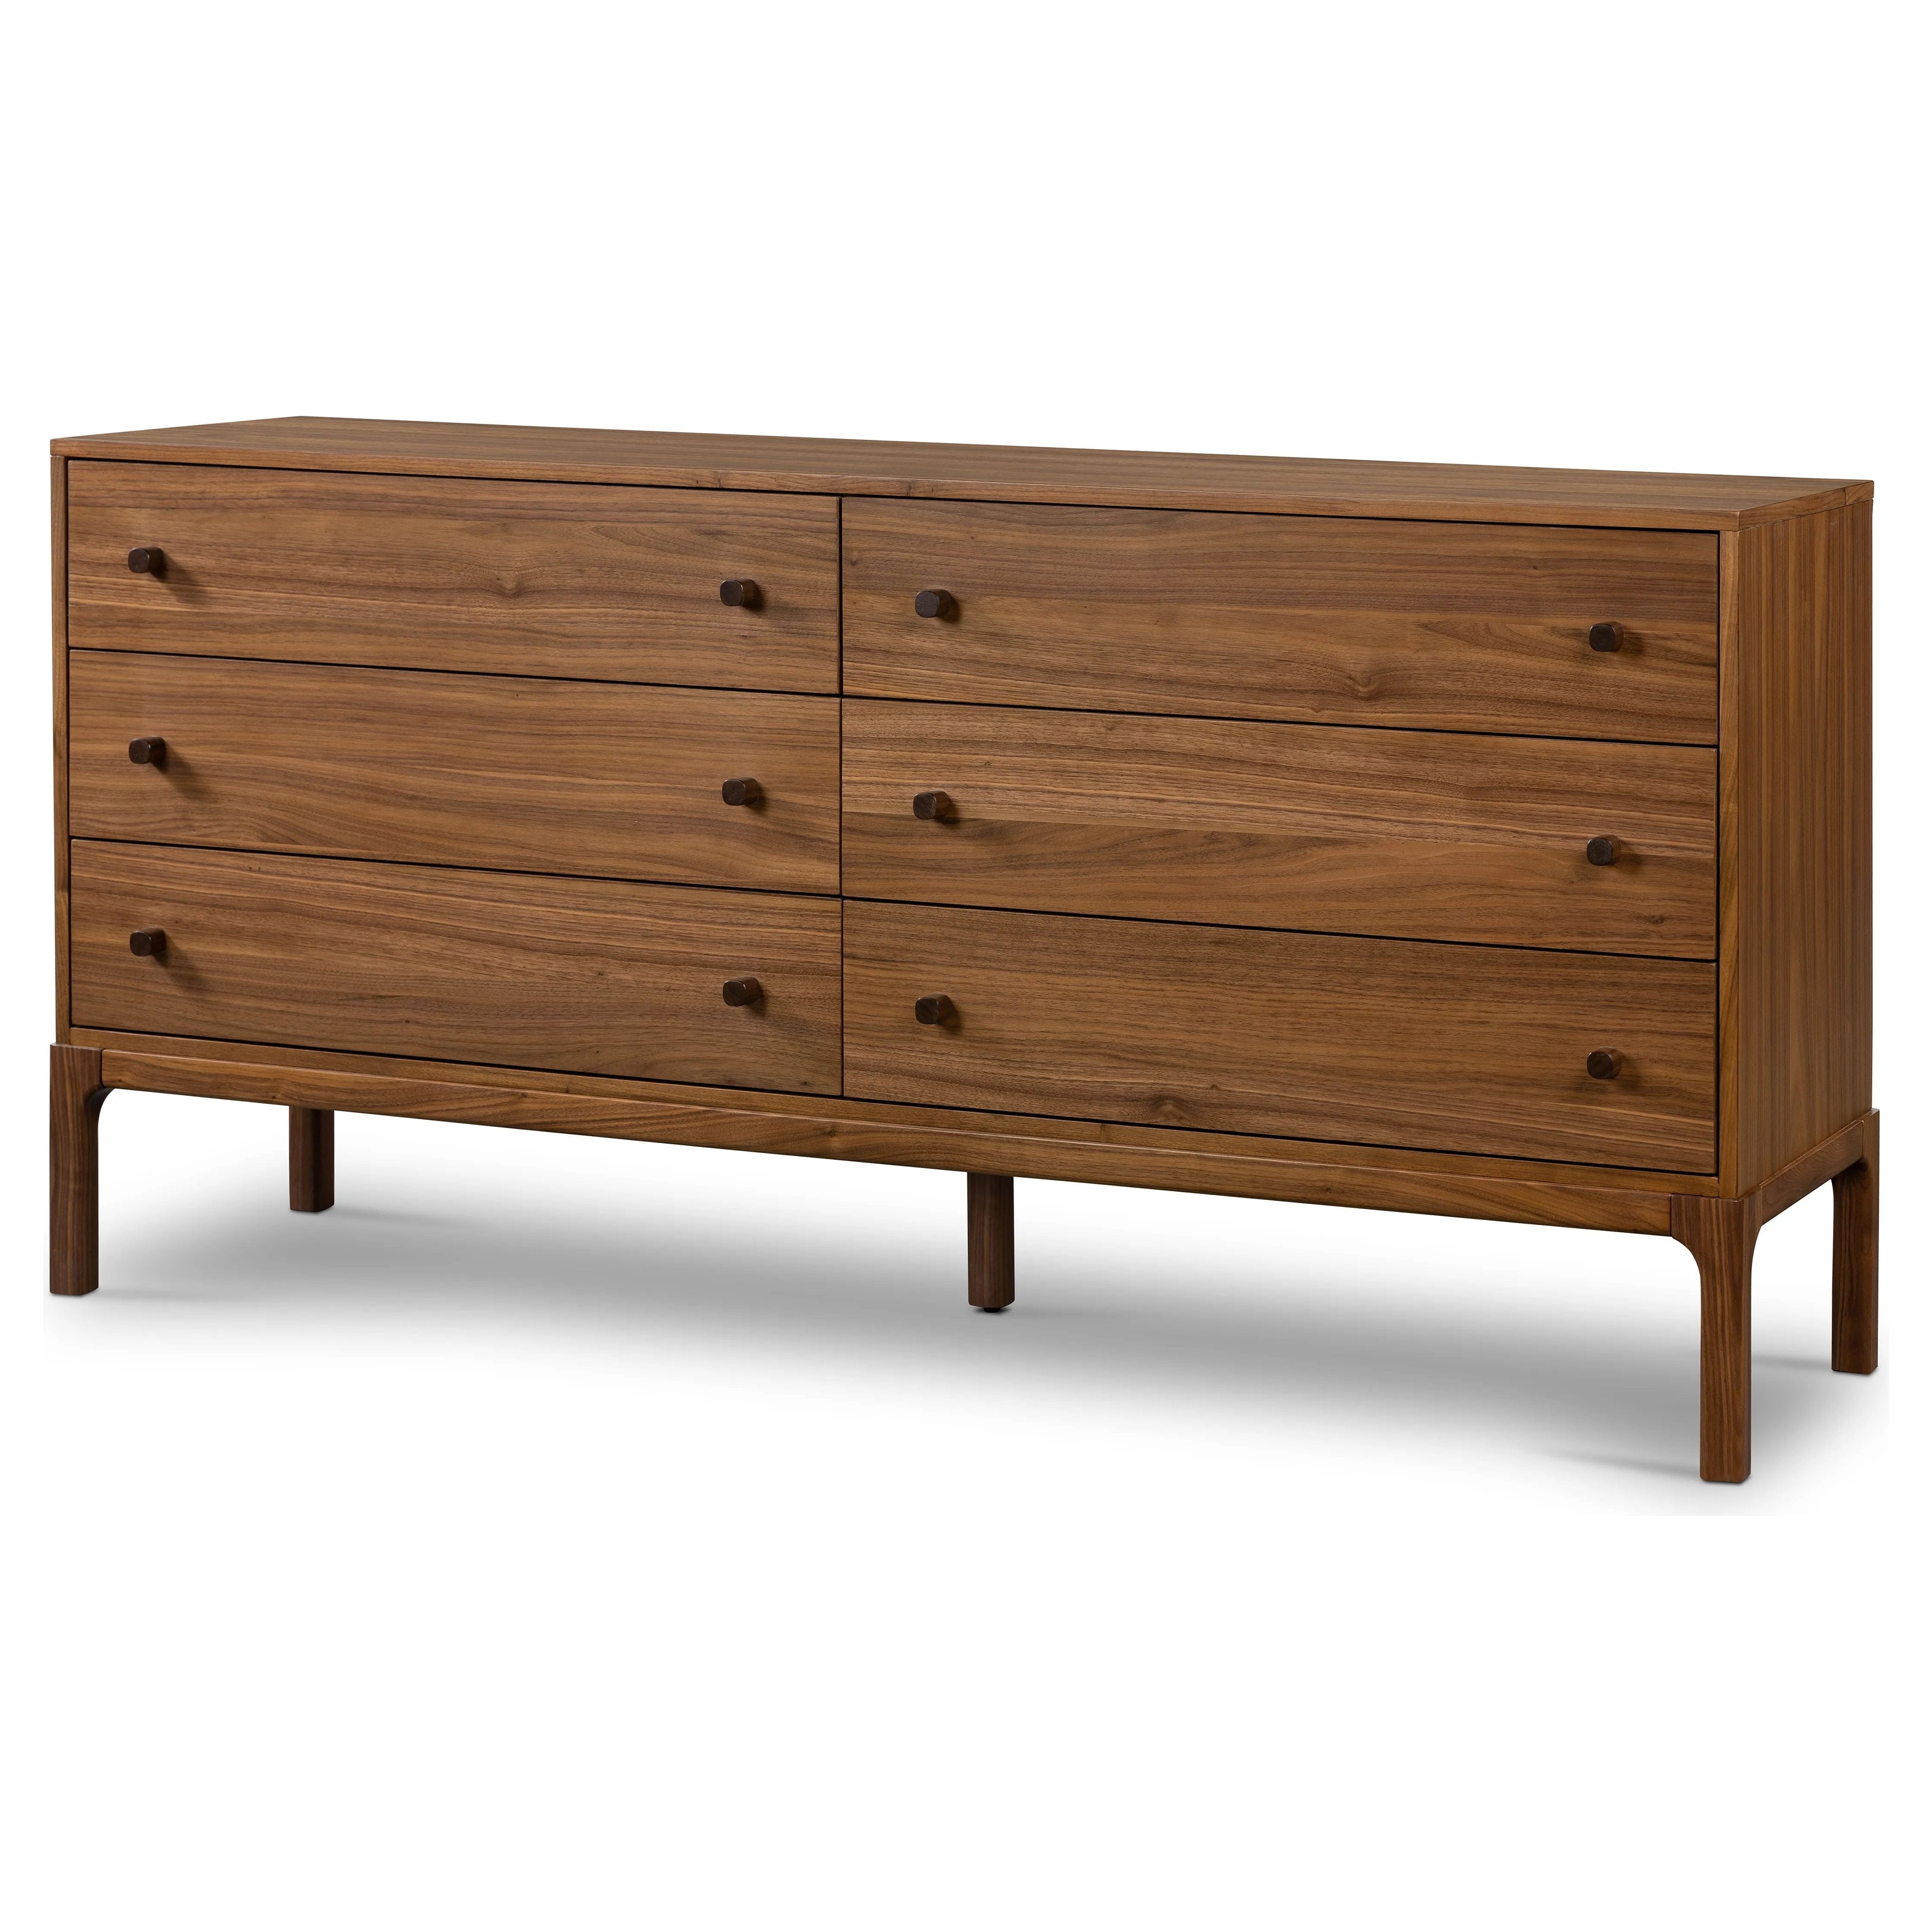 Inspired by campaign-style furniture of the 1800s â€” packable pieces first designed for traveling military use â€” a simply shaped dresser of natural walnut features a subtly inset top and rounded legs, finished with wooden hardware Amethyst Home provides interior design, new home construction design consulting, vintage area rugs, and lighting in the Washington metro area.